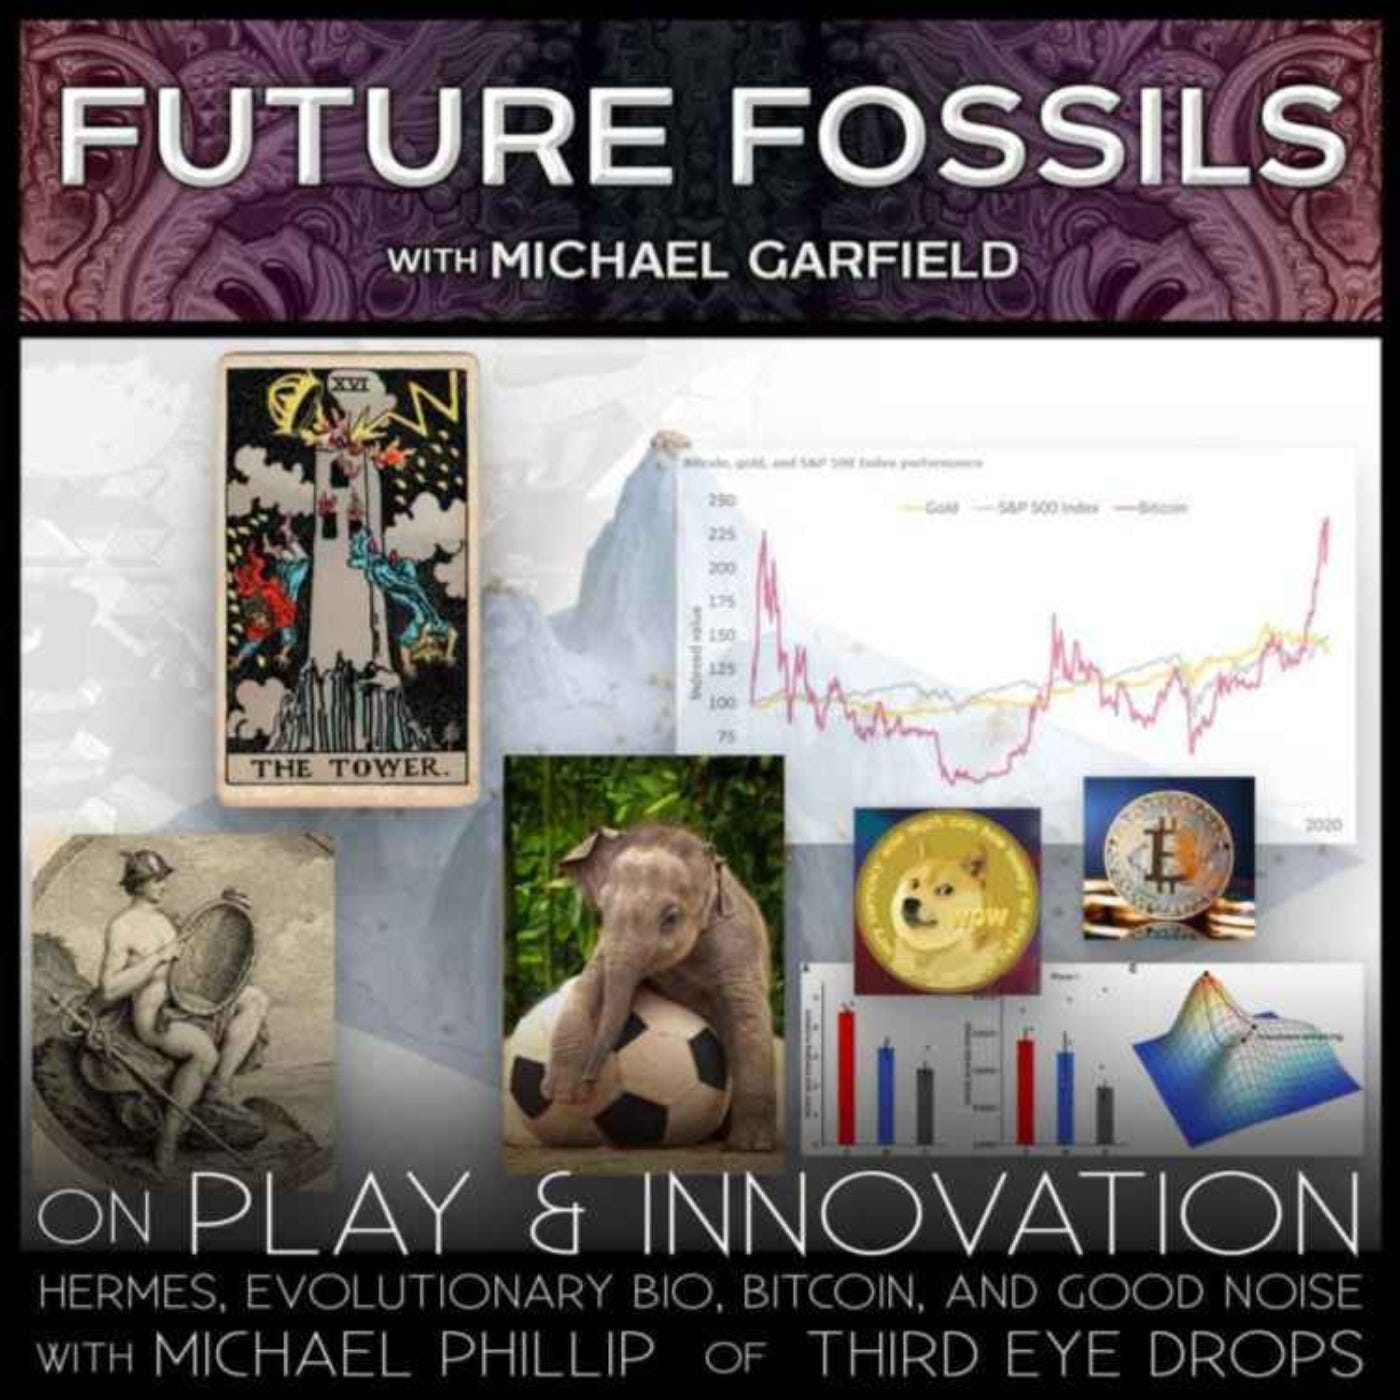 161 - On Play & Innovation with Michael Phillip: Hermes, EvoBio, Bitcoin, and Good Noise